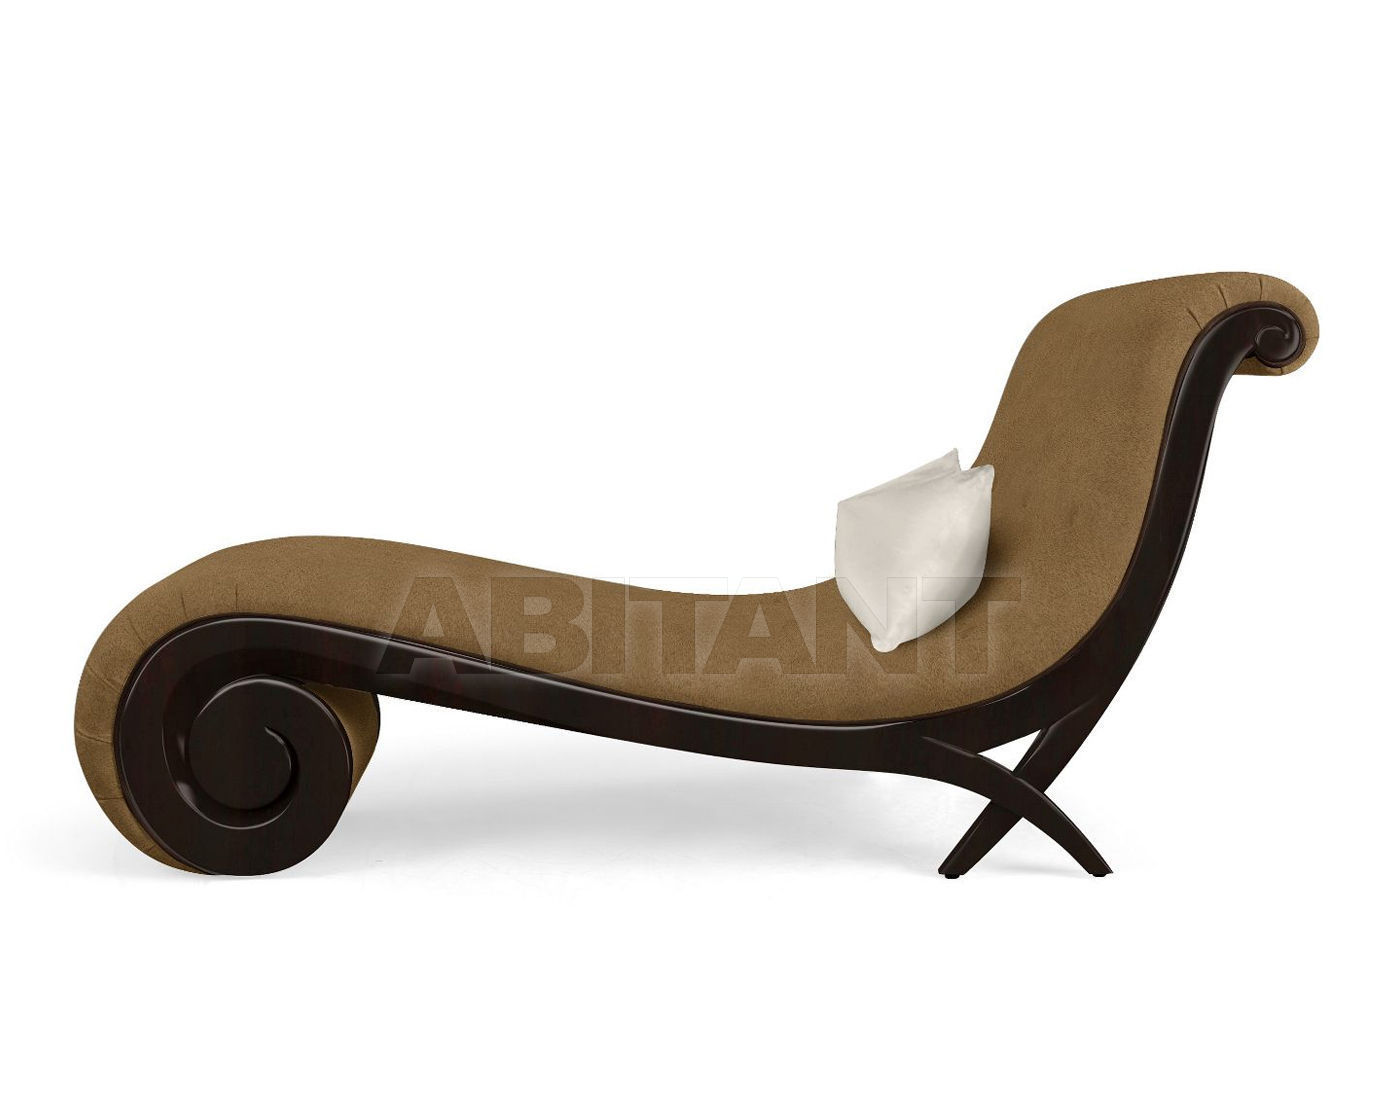 Buy Couch Le Meurice Christopher Guy 2014 60-0107-CC Amber